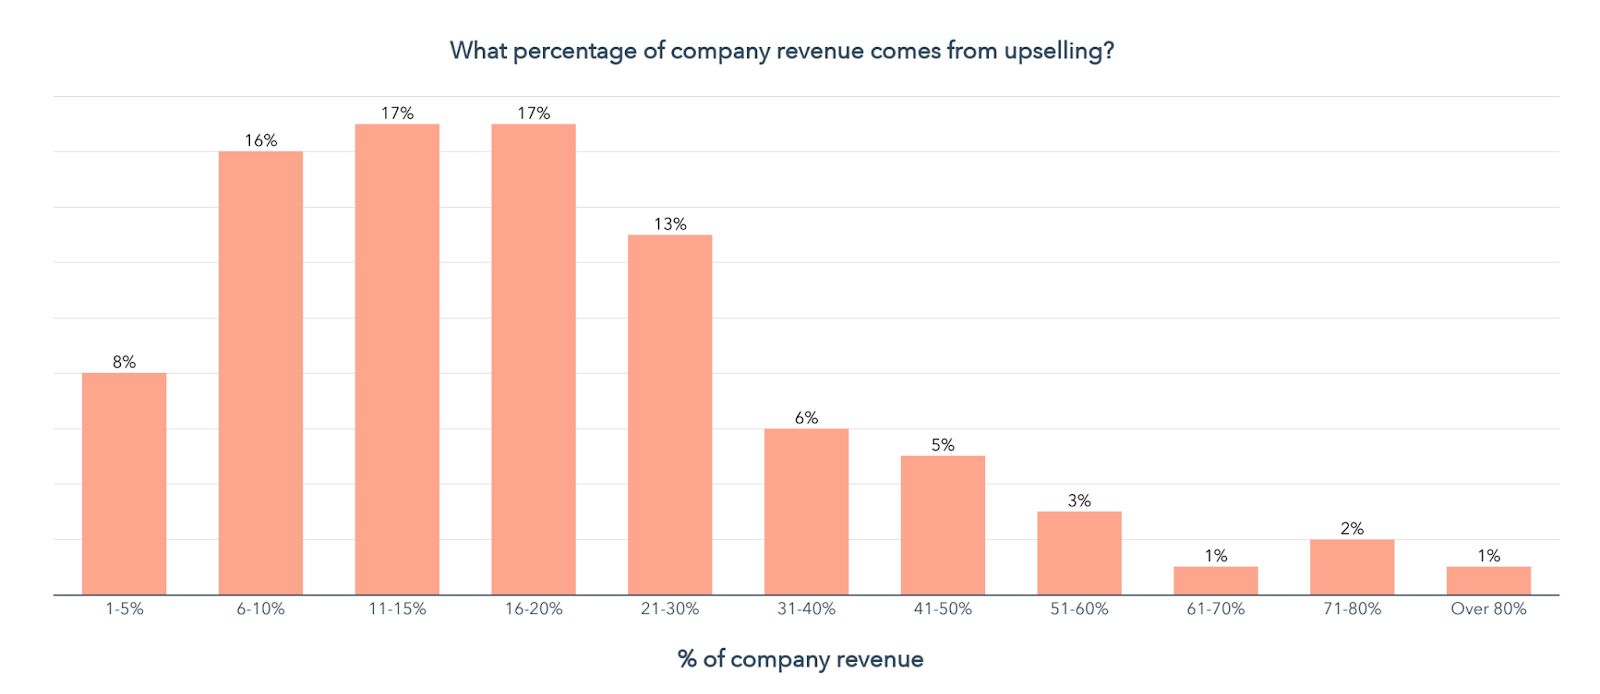 What percentage of company revenue comes from upselling?